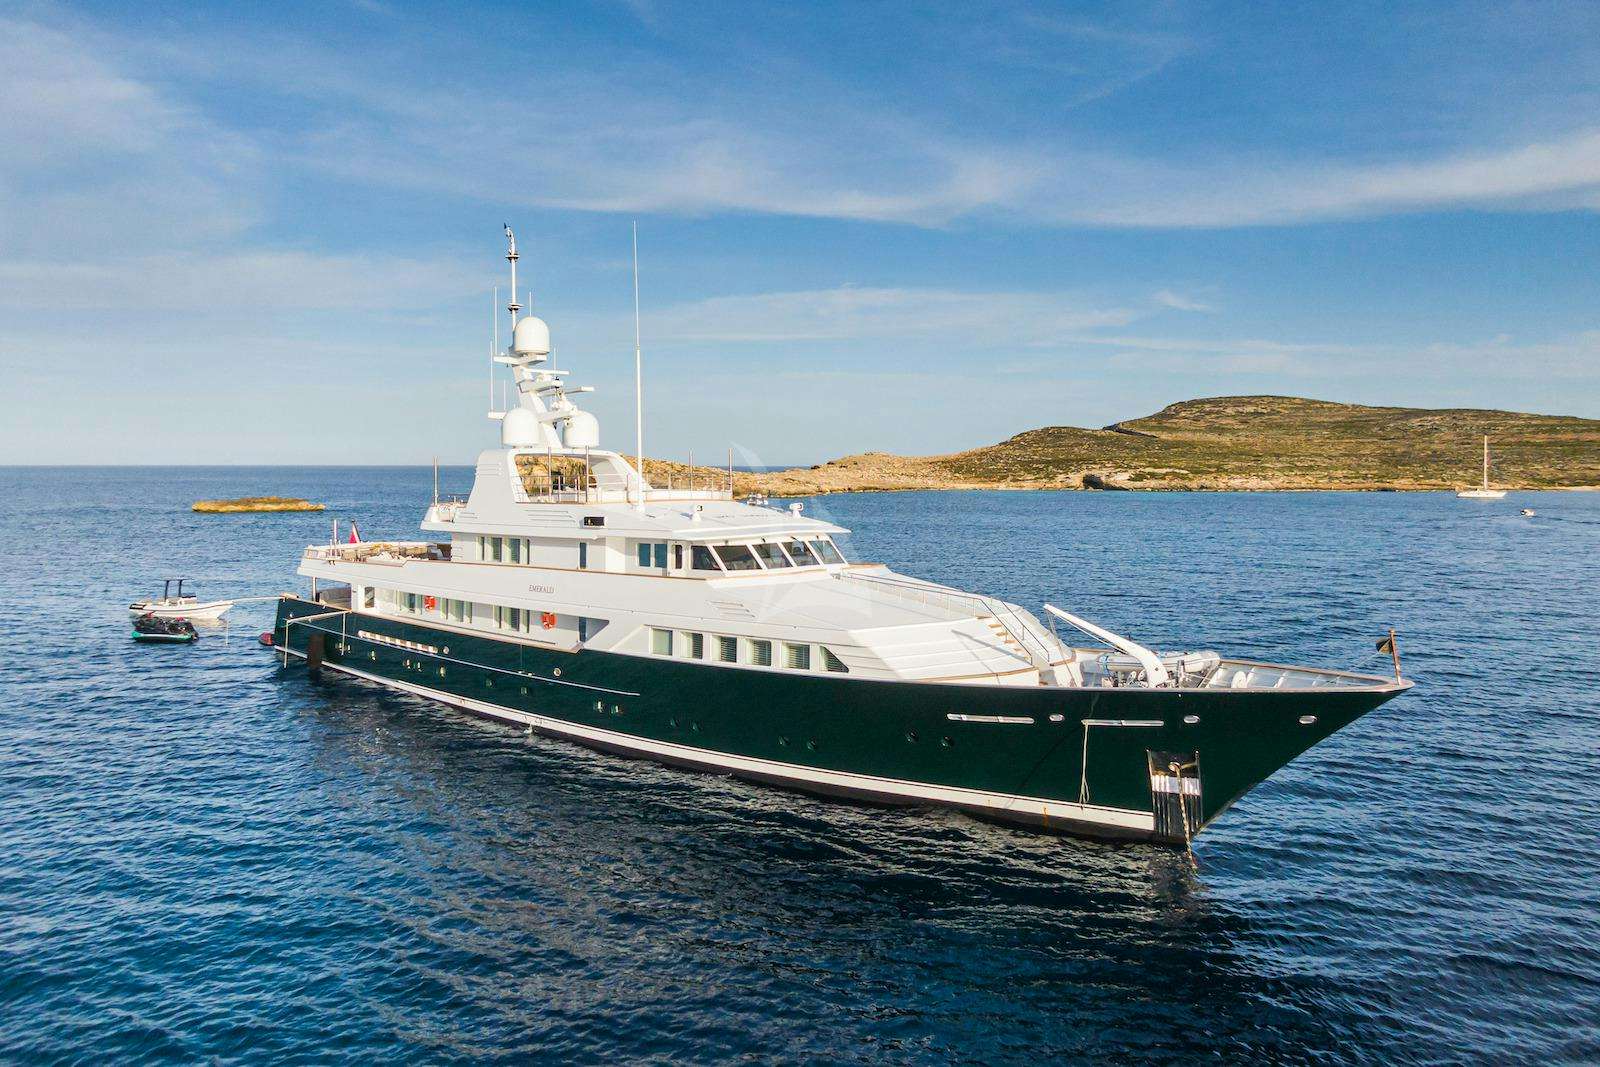 FEADSHIP Yacht Charter - View ALL yachts for 2022/2023